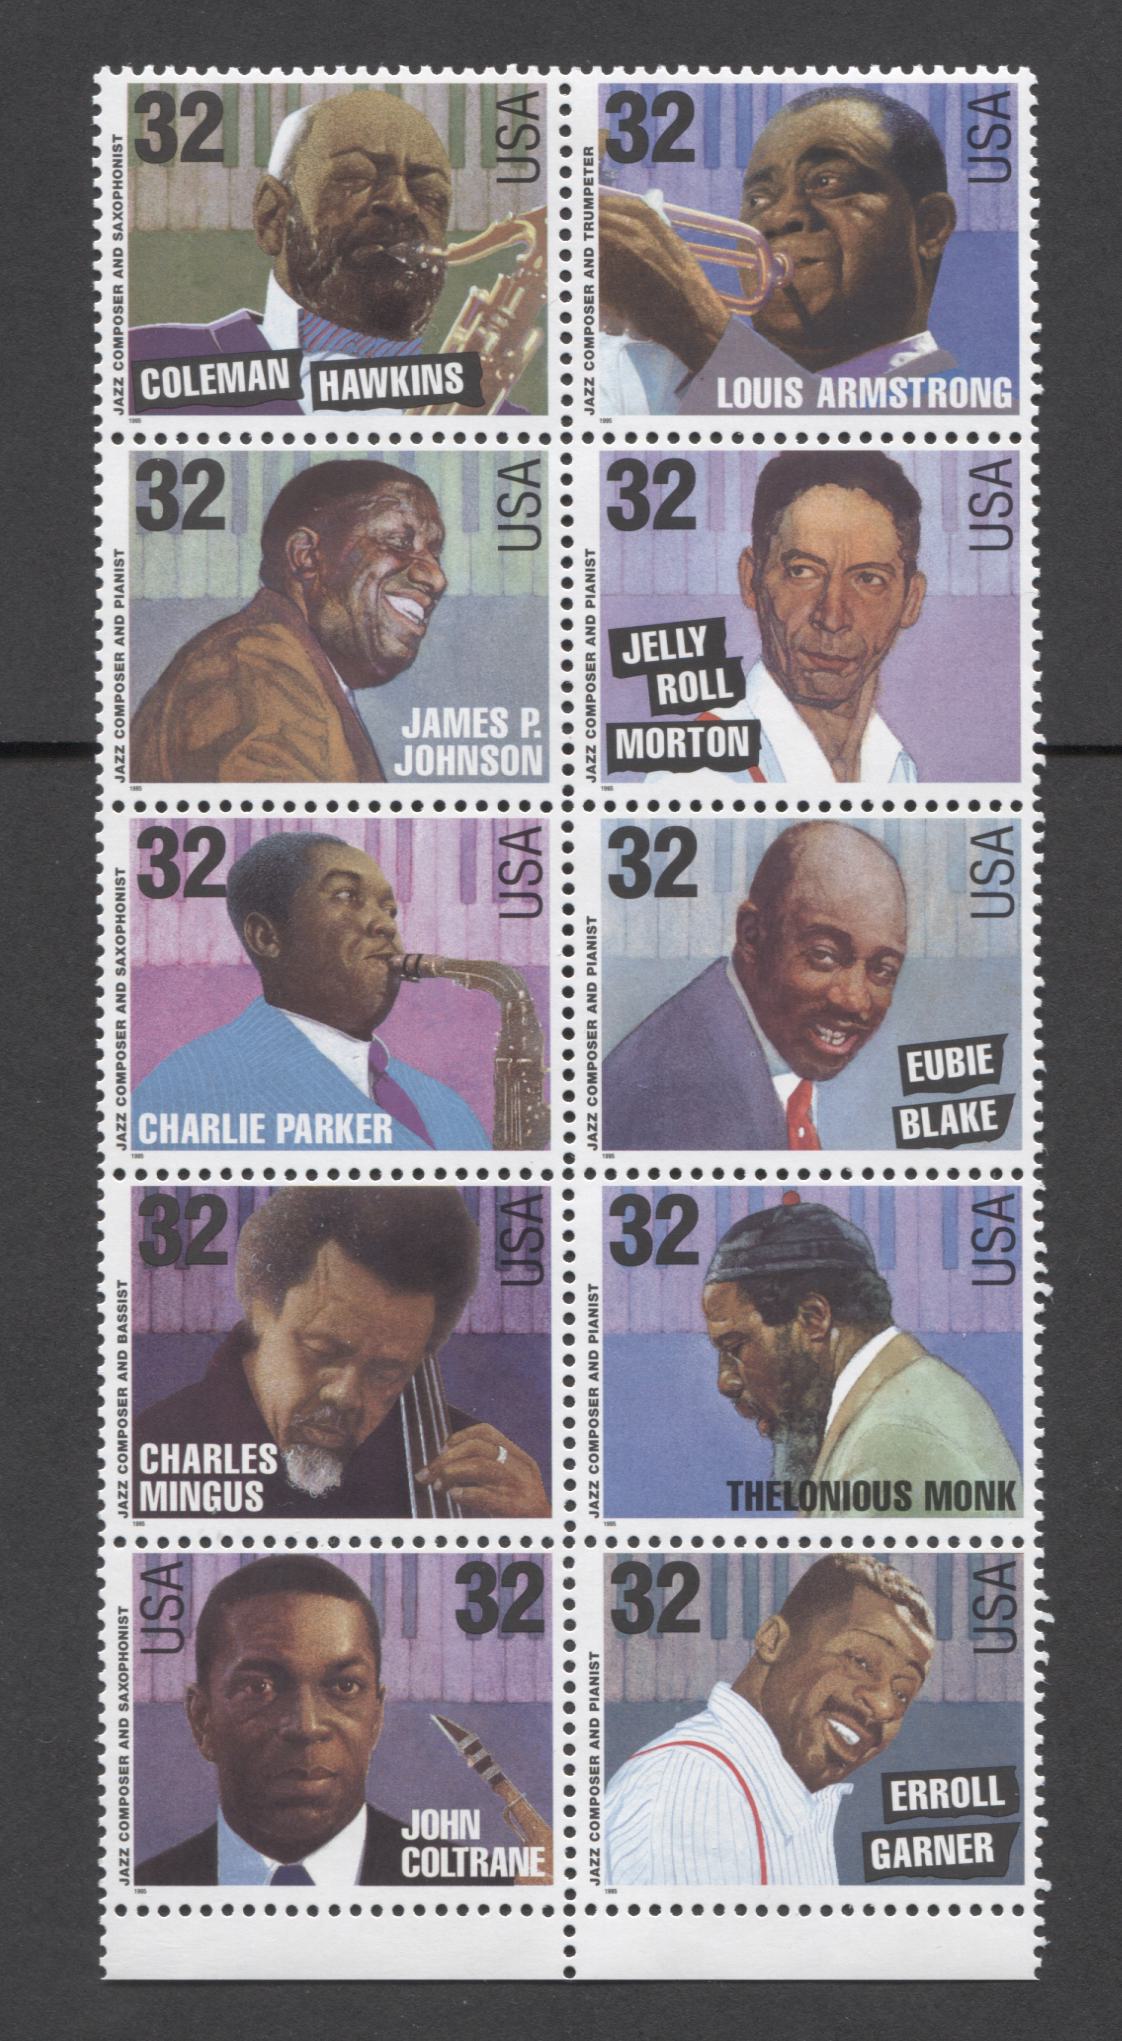 Lot 63 United States SC#2992a 32c Multicolored 1995 American Music Issue, A VFNH Block OF 10, Click on Listing to See ALL Pictures, 2017 Scott Cat. $23